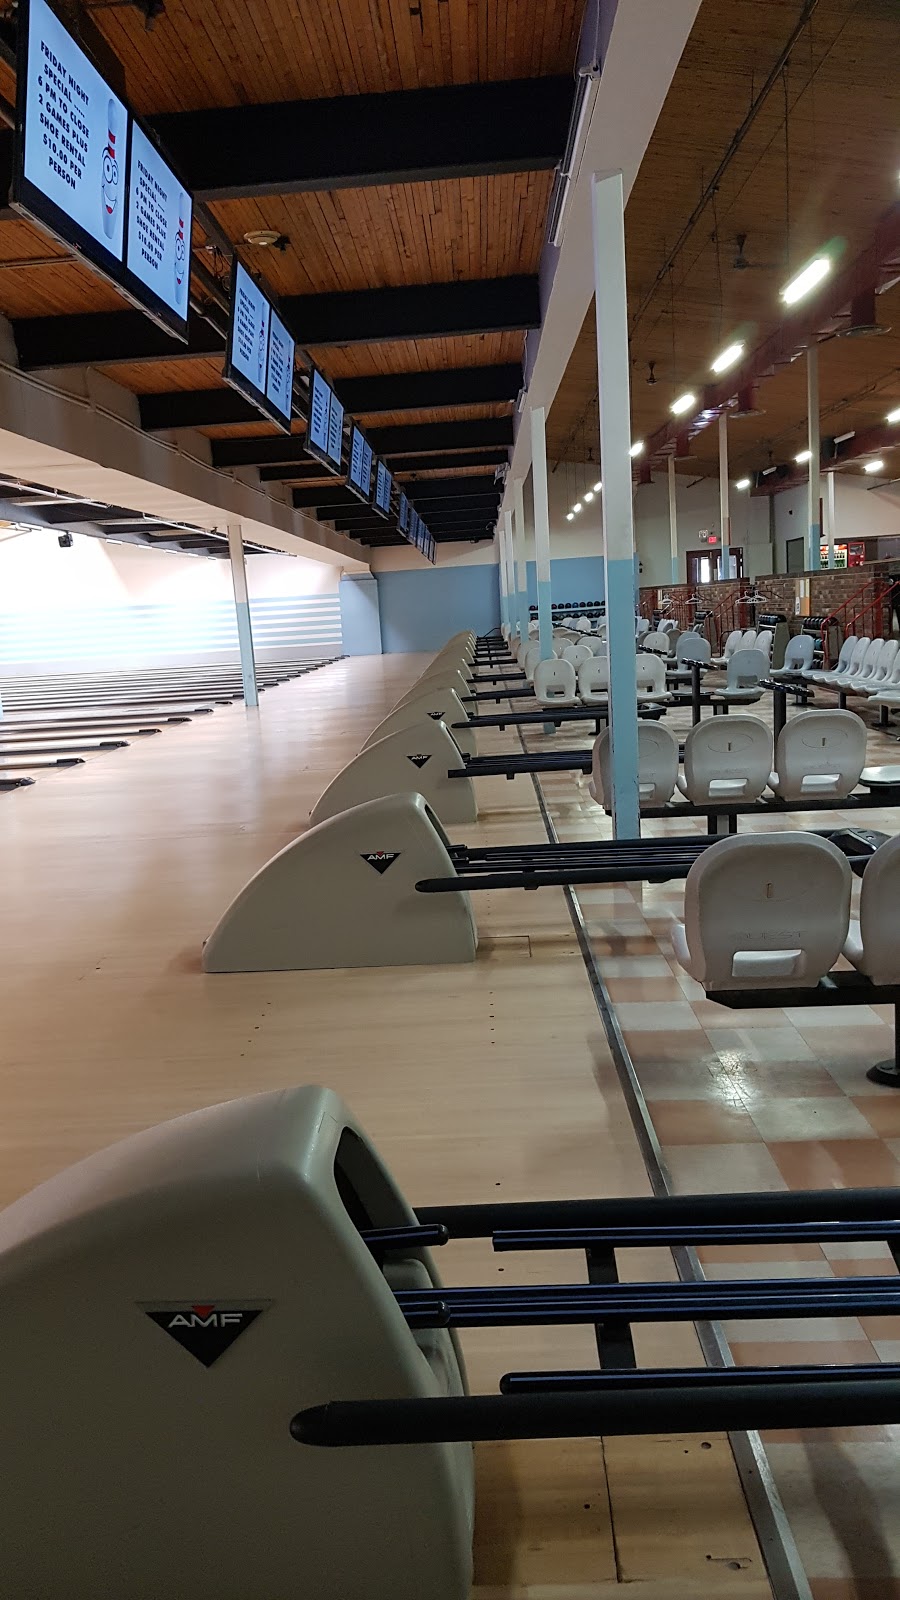 Prost Bowling Centre | bowling alley | 830 Gardiners Rd, Kingston, ON K7M 3X9, Canada | 6133898117 OR +1 613-389-8117